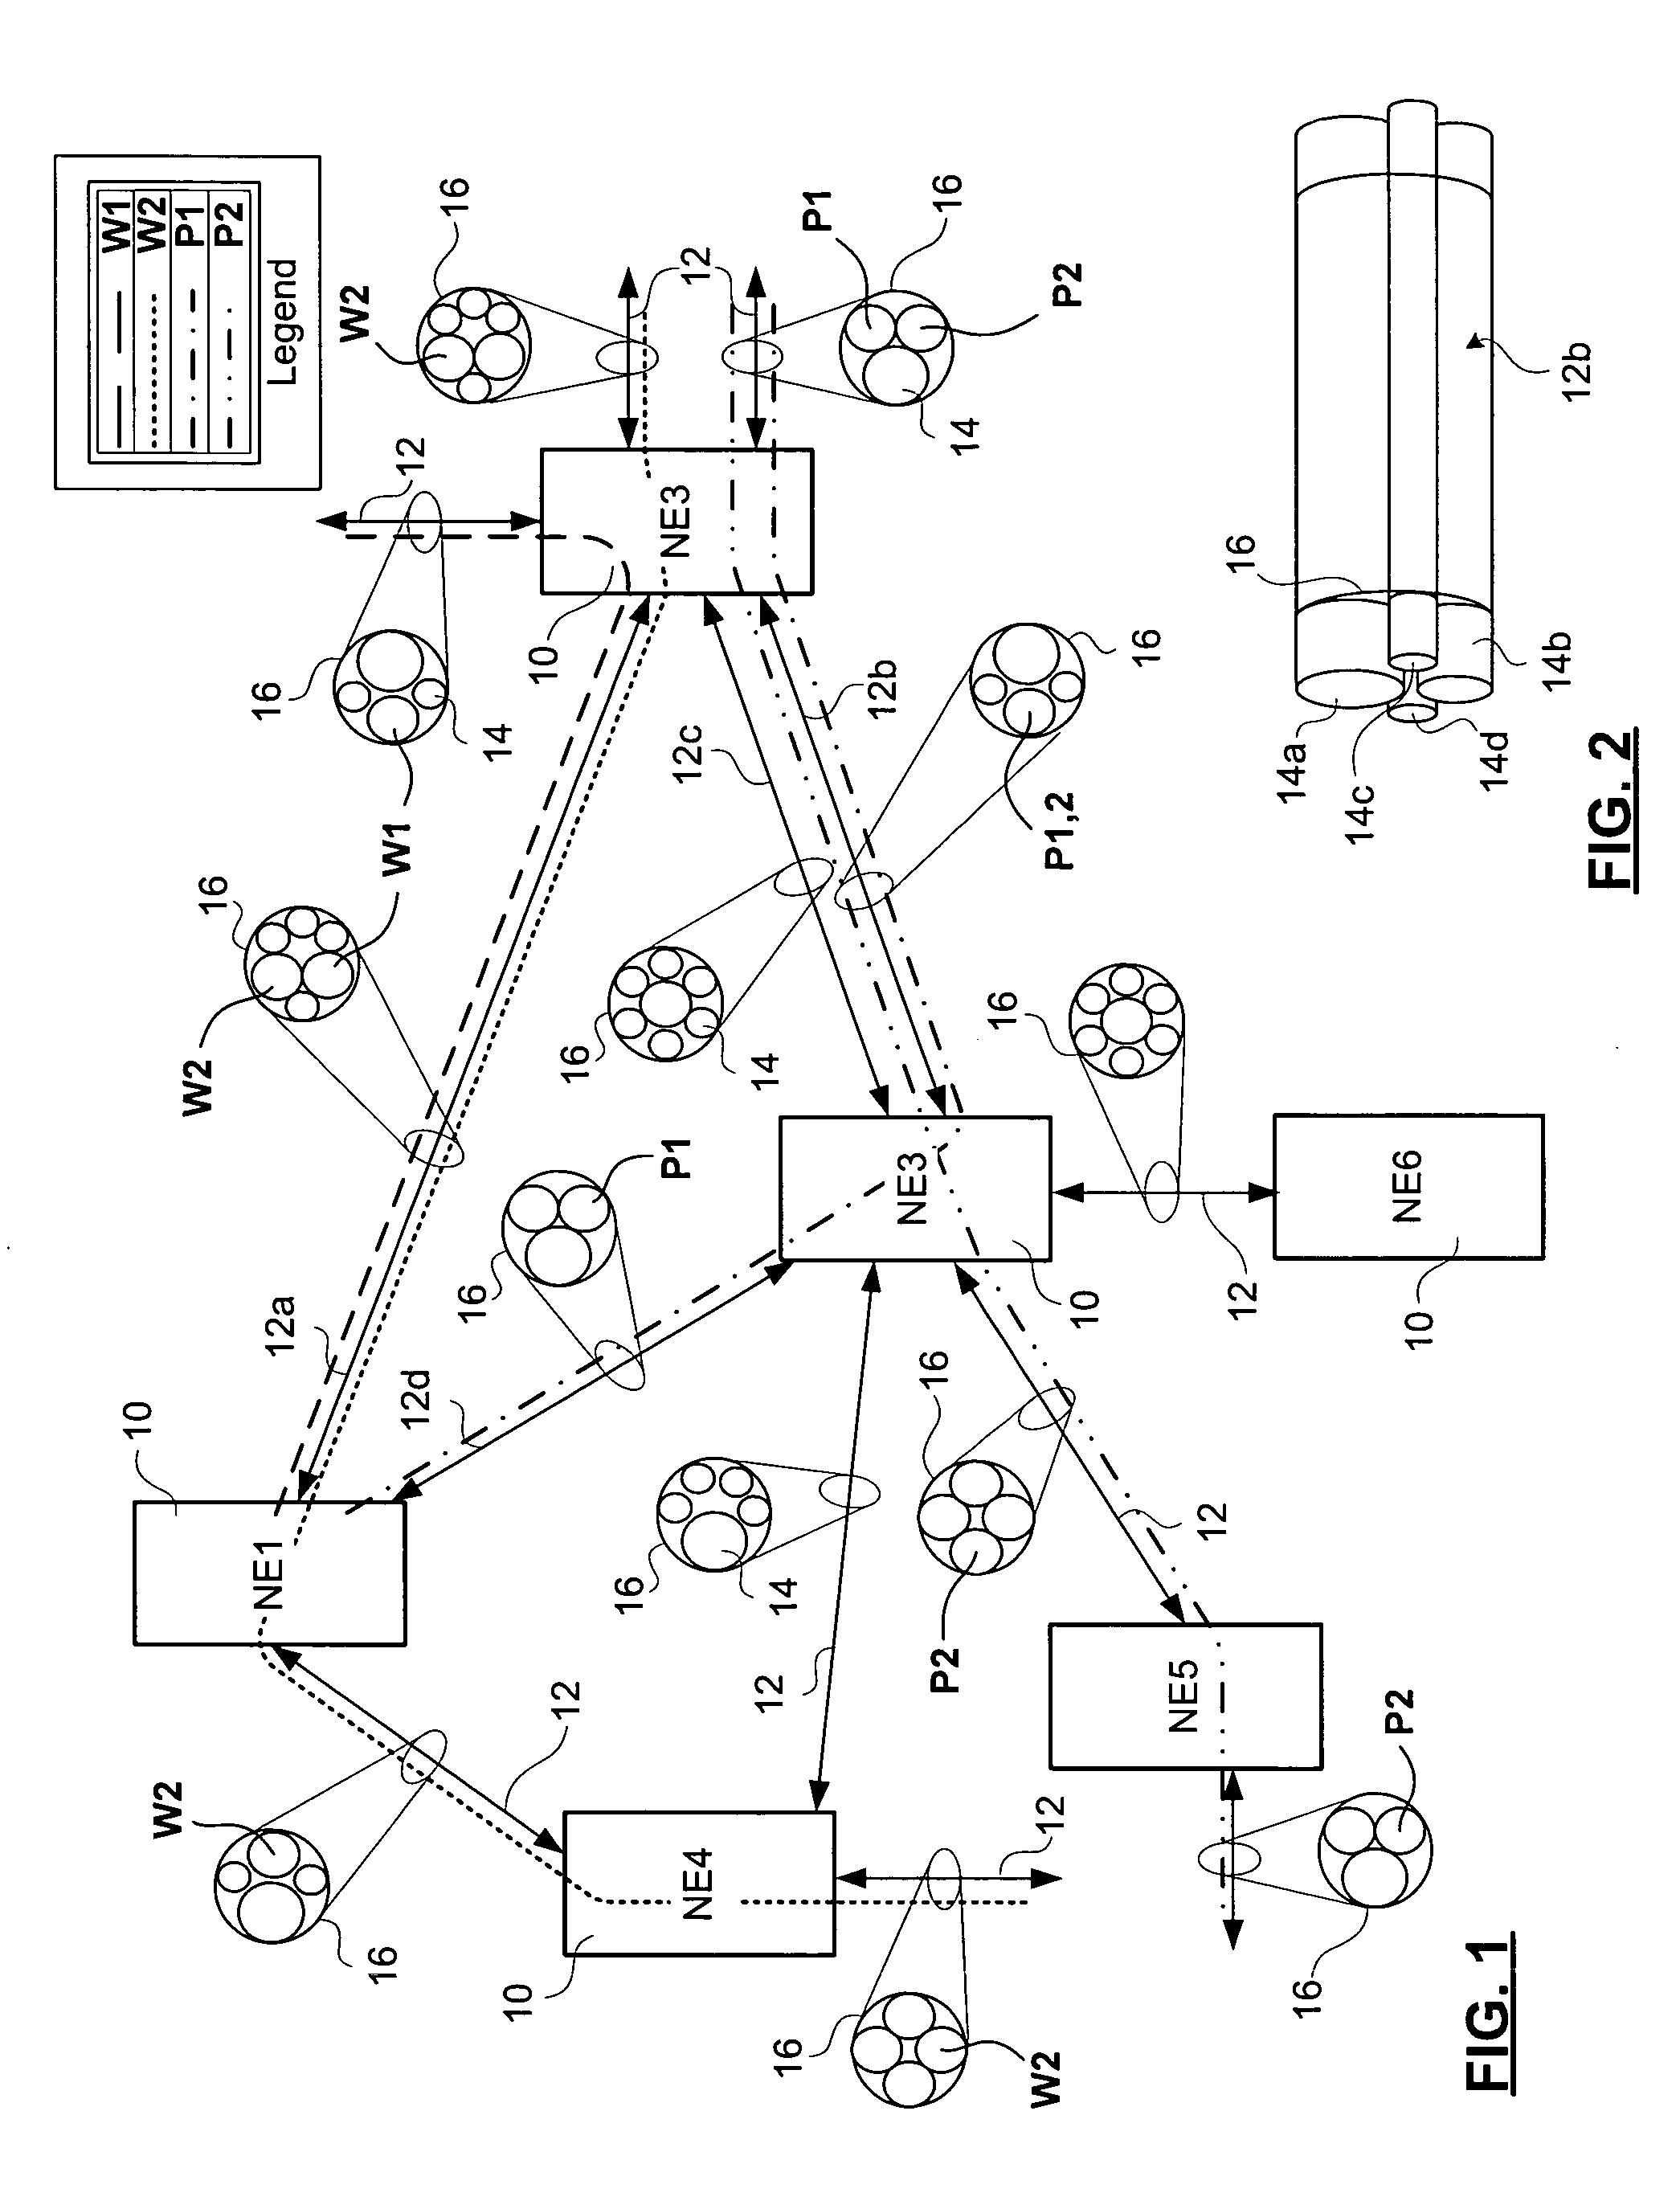 Method and apparatus for protection switch messaging on a shared mesh network